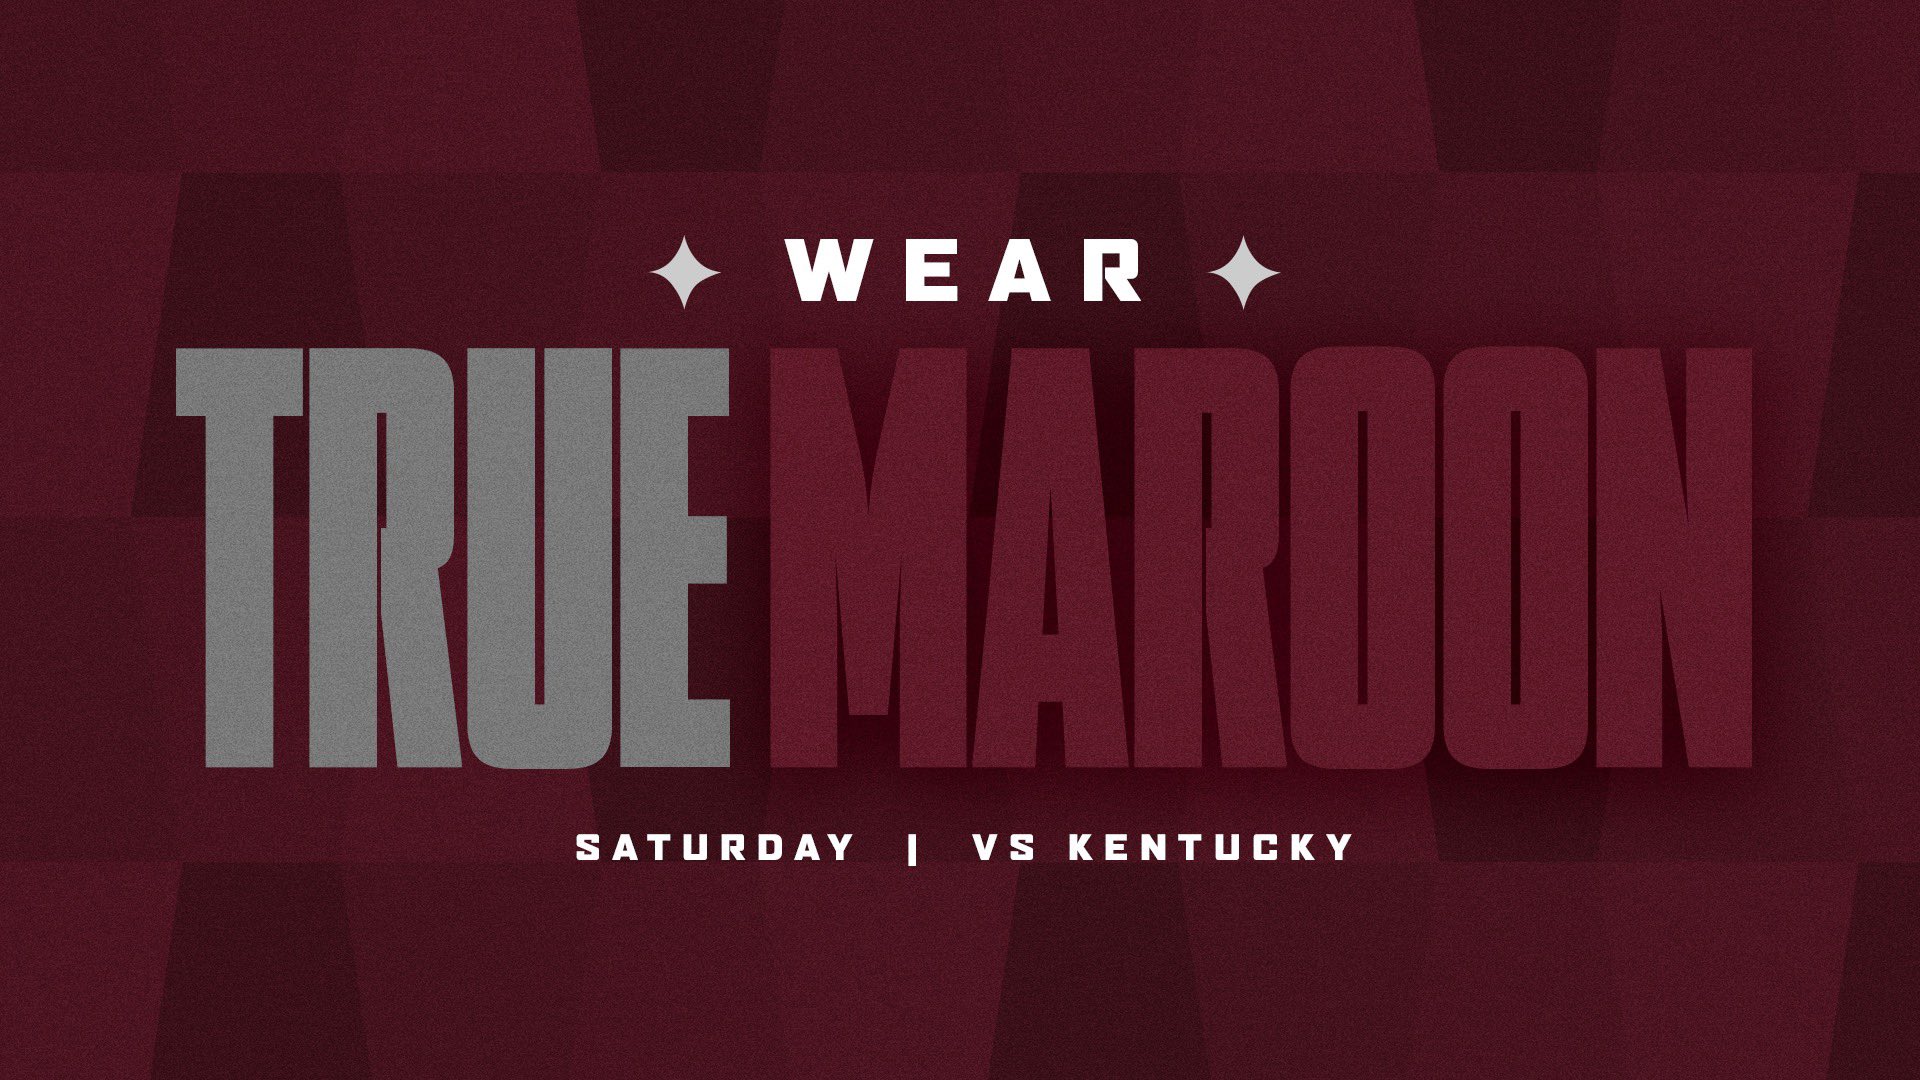 Maroon graphic reminding fans to wear True Maroon during MSU's Oct. 30 football game against Kentucky